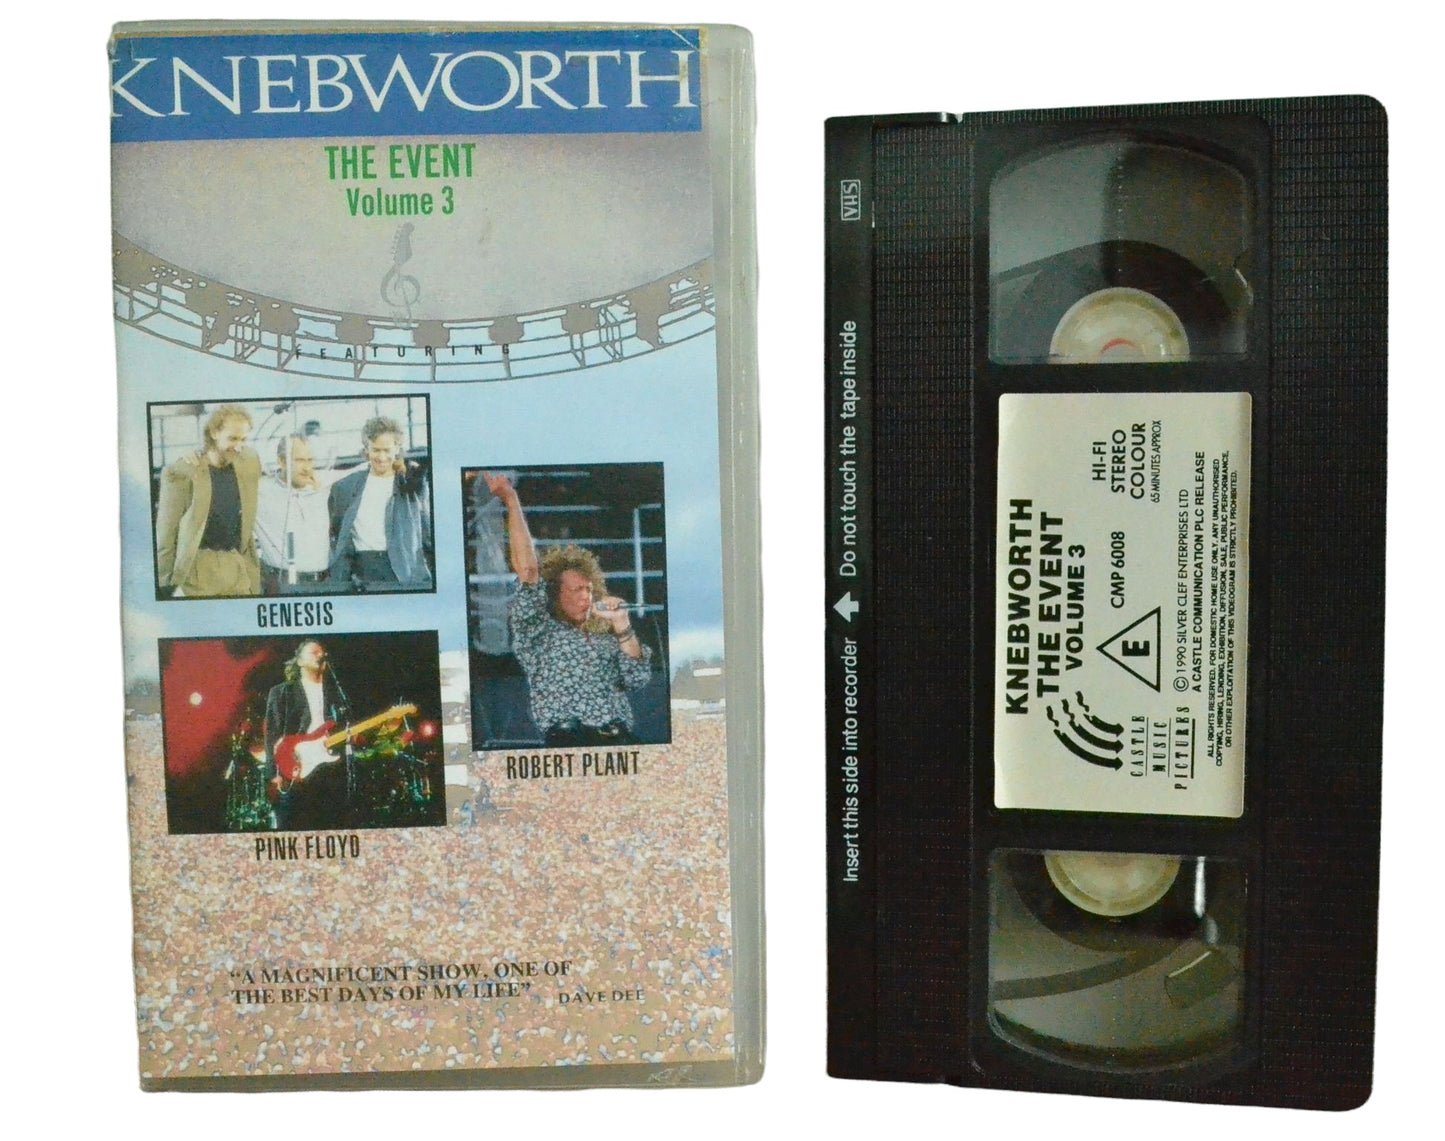 Knebworth The Event - Volume 3 - Status Quo - Castle Music Pictures - Music - Pal VHS-